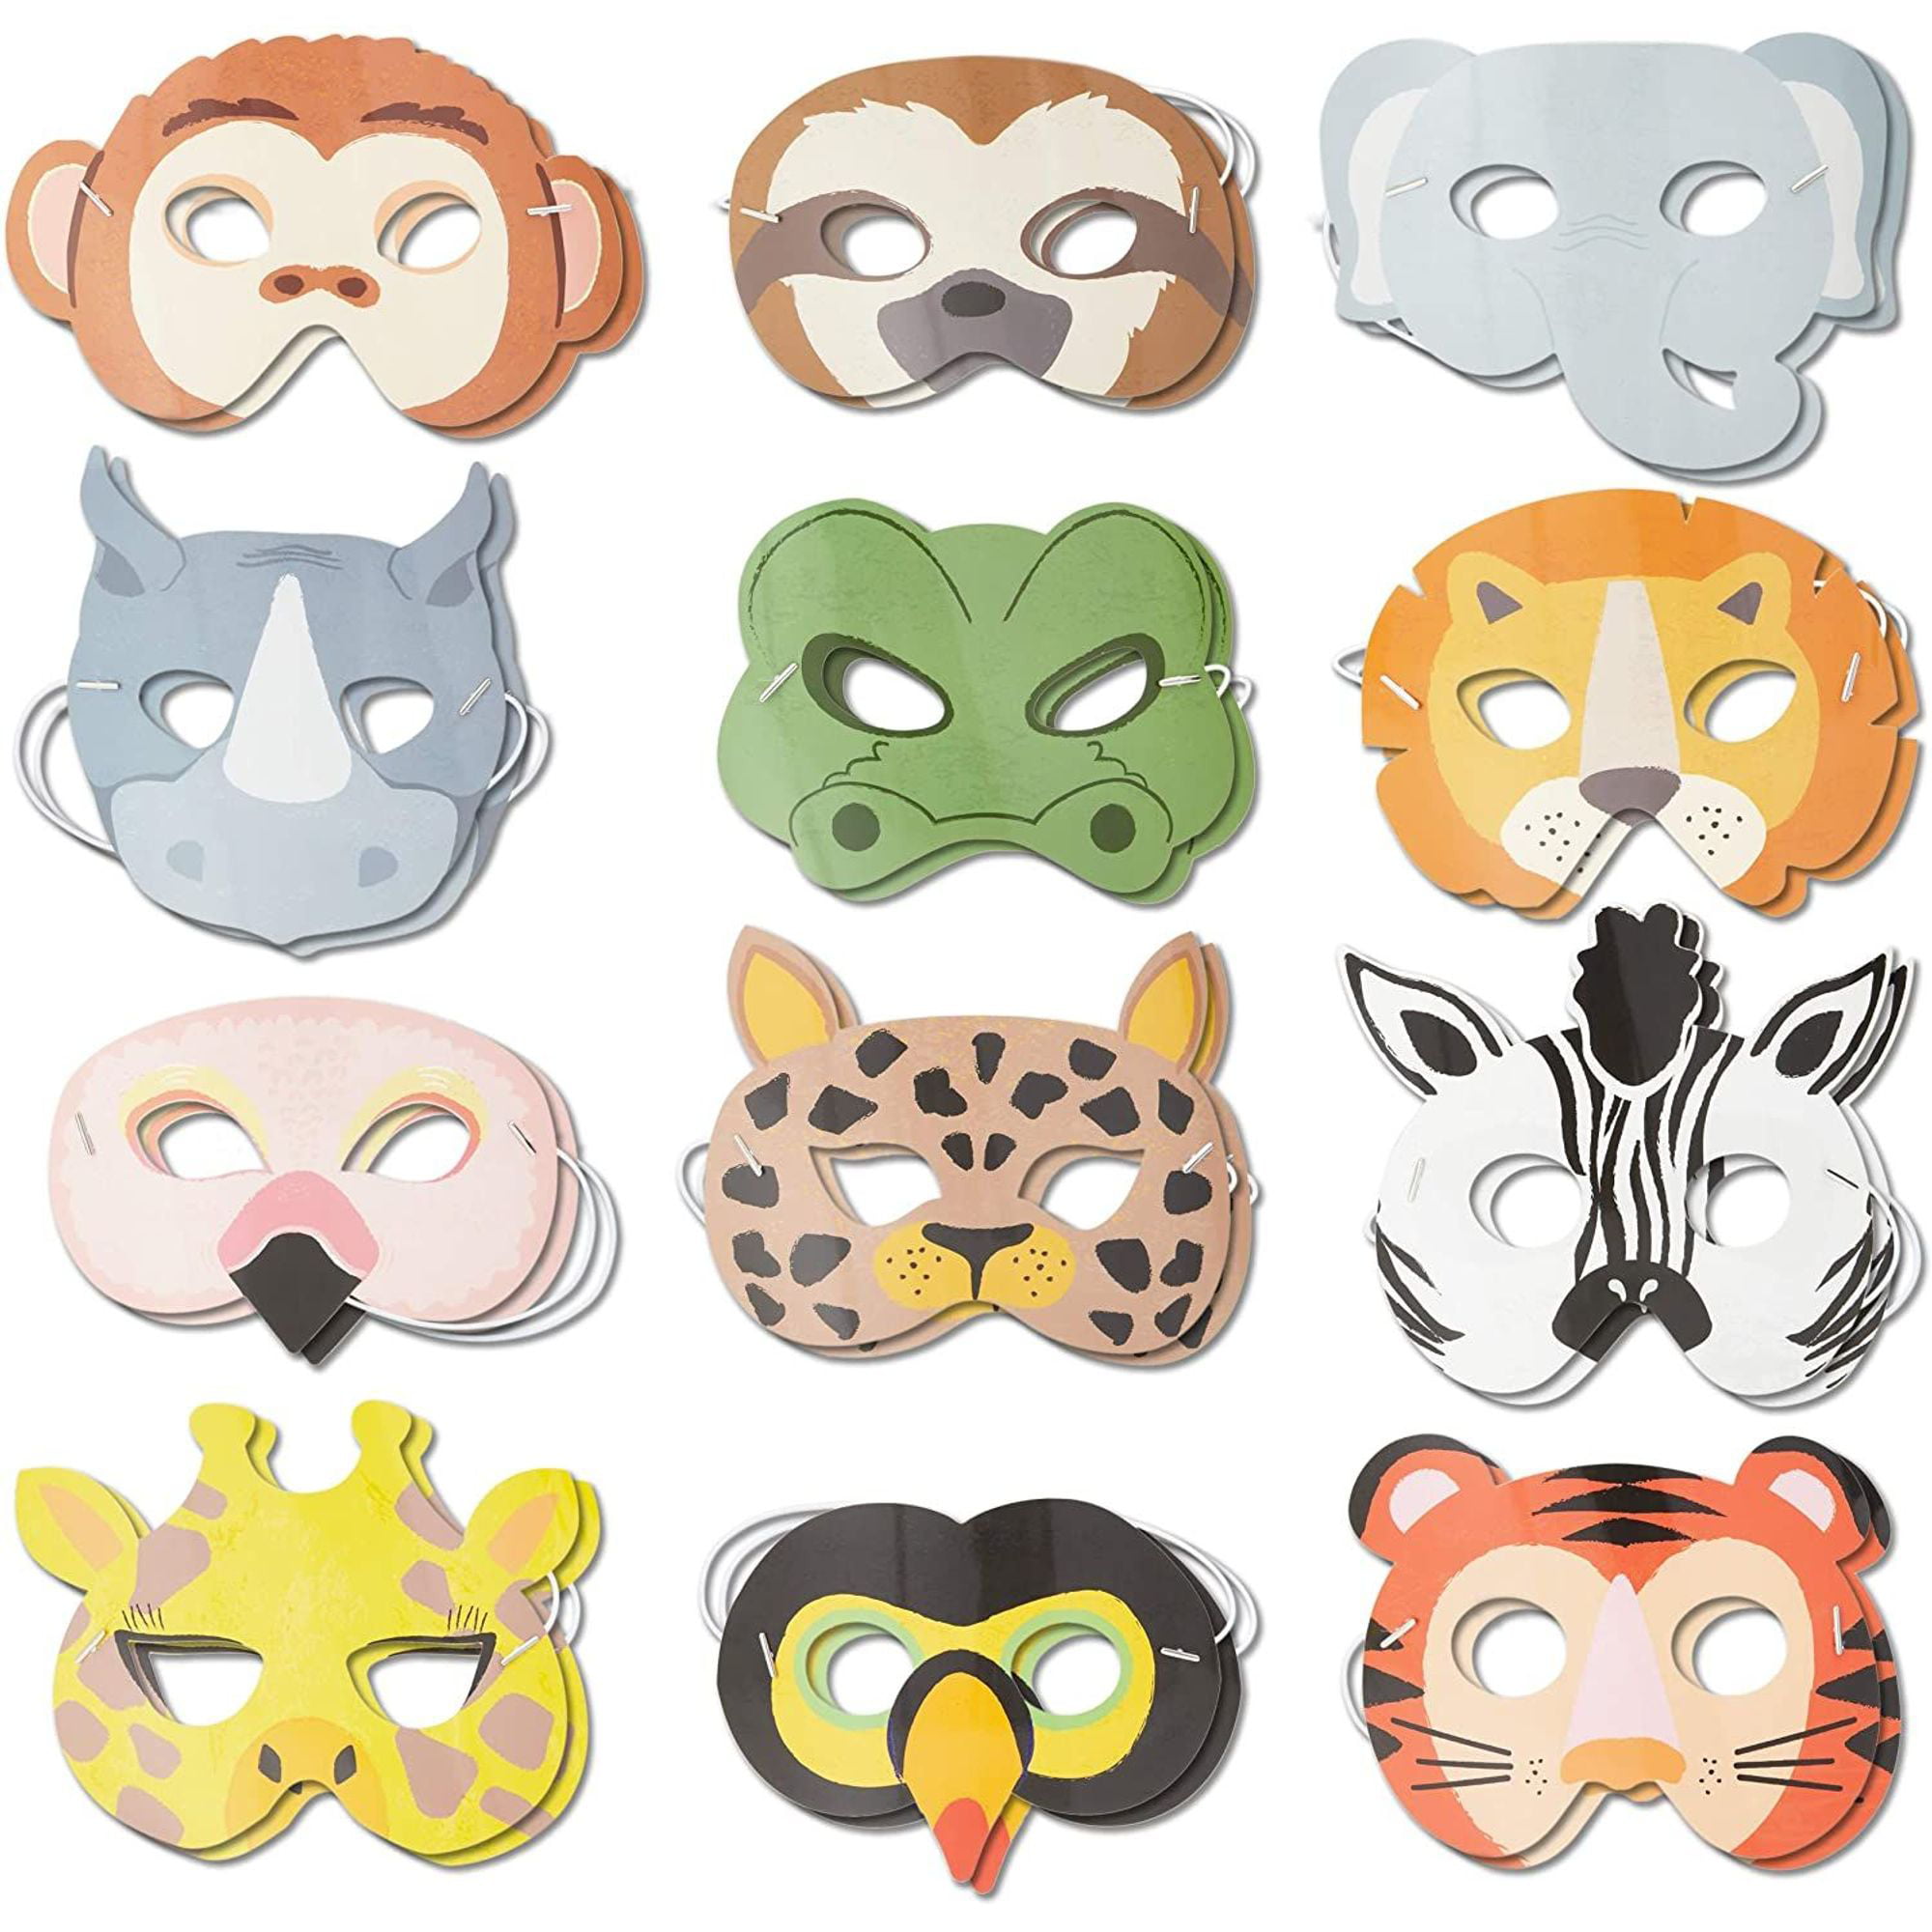 Adorox 24 Assorted Foam Animal Masks for Birthday Party Favors Dress-Up Costume